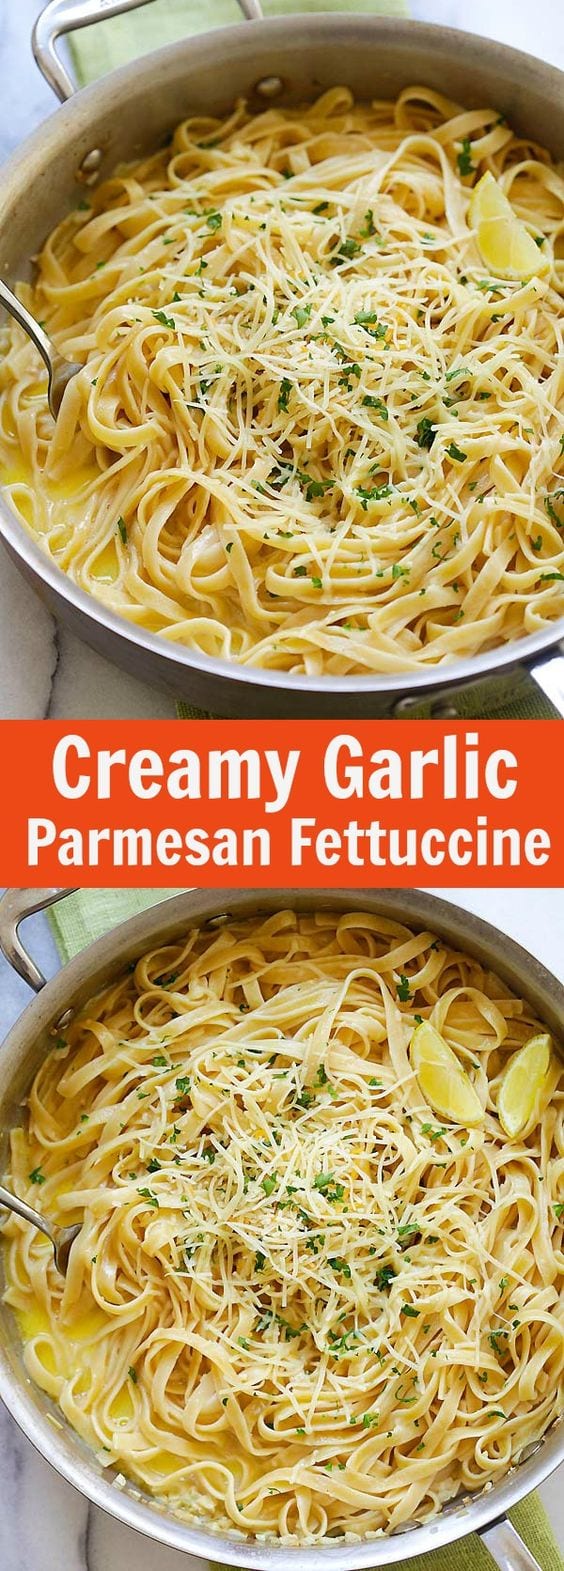 Creamy Garlic Parmesan Fettuccine – one-pot pasta with creamy garlic sauce and topped with Parmesan cheese. Dinner takes 20 mins | rasamalaysia.com